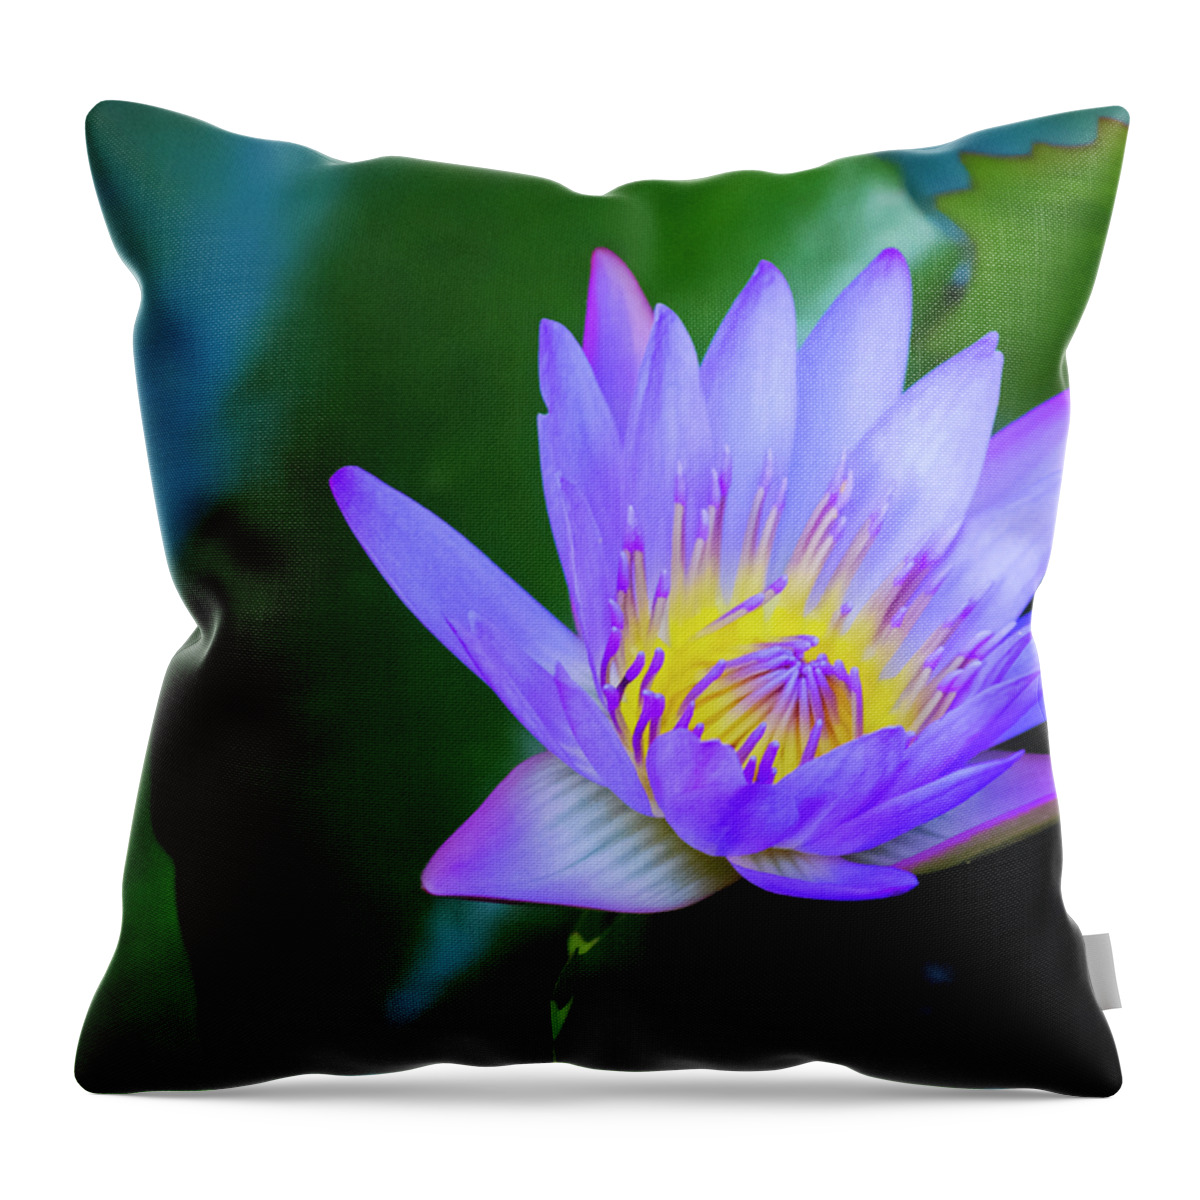 Exotic Flower Throw Pillow featuring the photograph Purple Water Lily by Christi Kraft